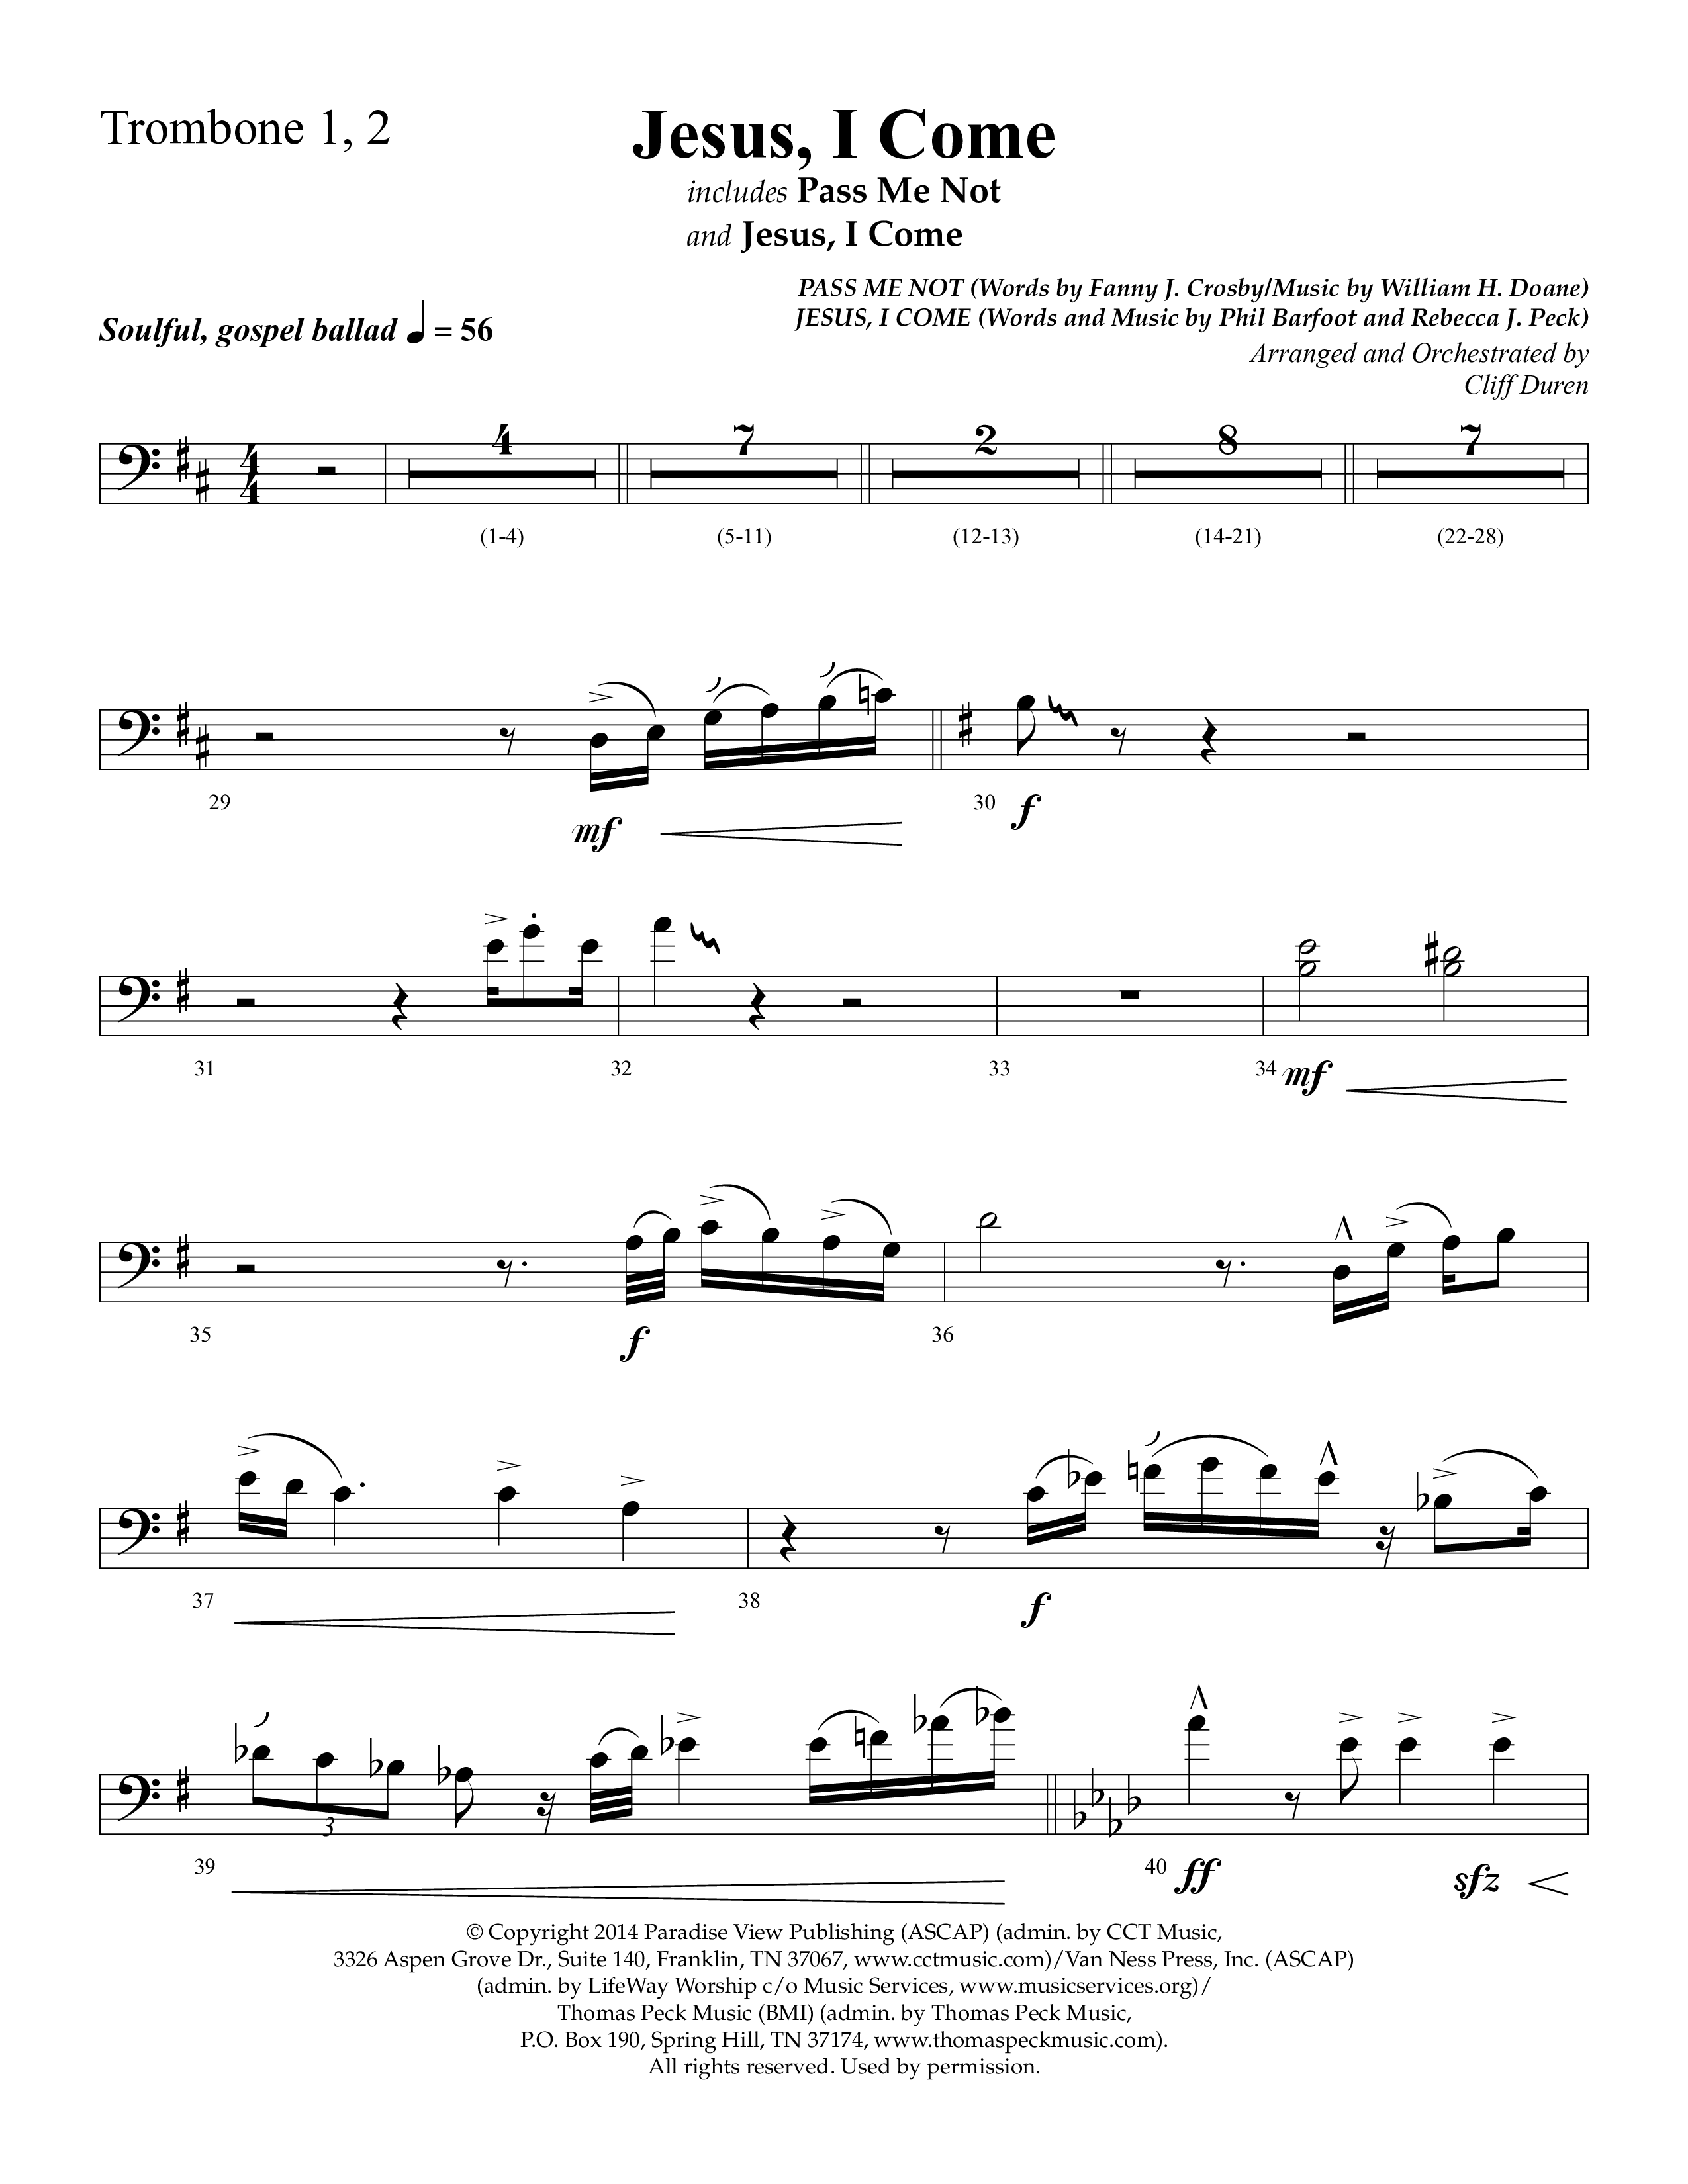 Jesus I Come (with Pass Me Not) (Choral Anthem SATB) Trombone 1/2 (Lifeway Choral / Arr. Cliff Duren)